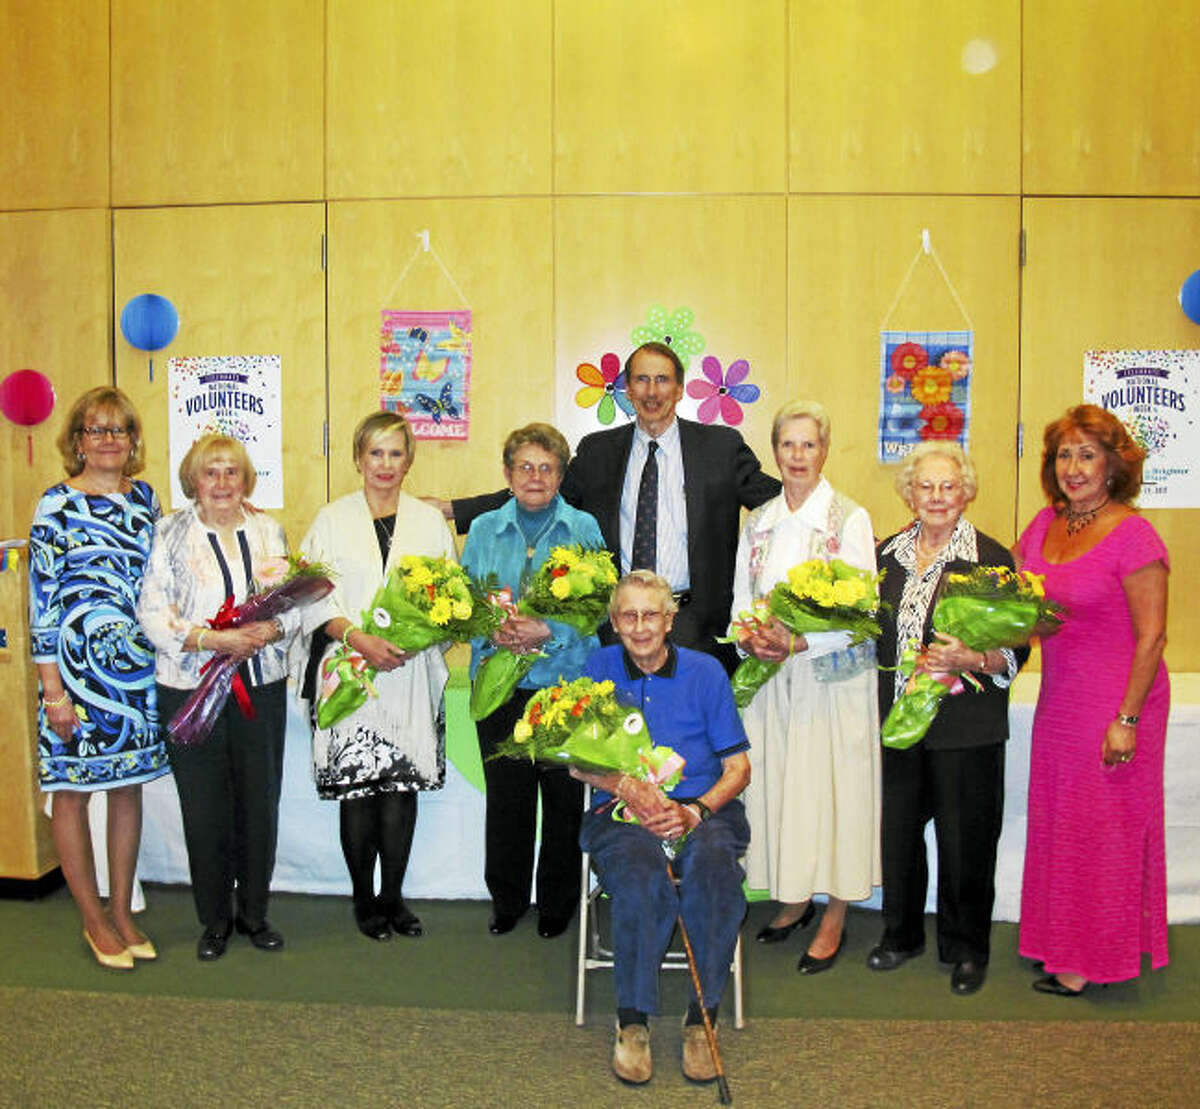 Nearly 190 volunteers were honored at Milford Hospital’s annual appreciation dinner. From left, Karen Kipfer, director of community relations; Patricia Cucuzza, 500 hours of service; Suzanne Beliveau, 45 years; Karin May, 45 years; Dr. Lloyd Friedman, COO; Sharon Sabo; 45 years; Patricia Damon, 40 years; and Christine Brown, volunteer coordinator. Missing: Penny Oliver, 50 years.